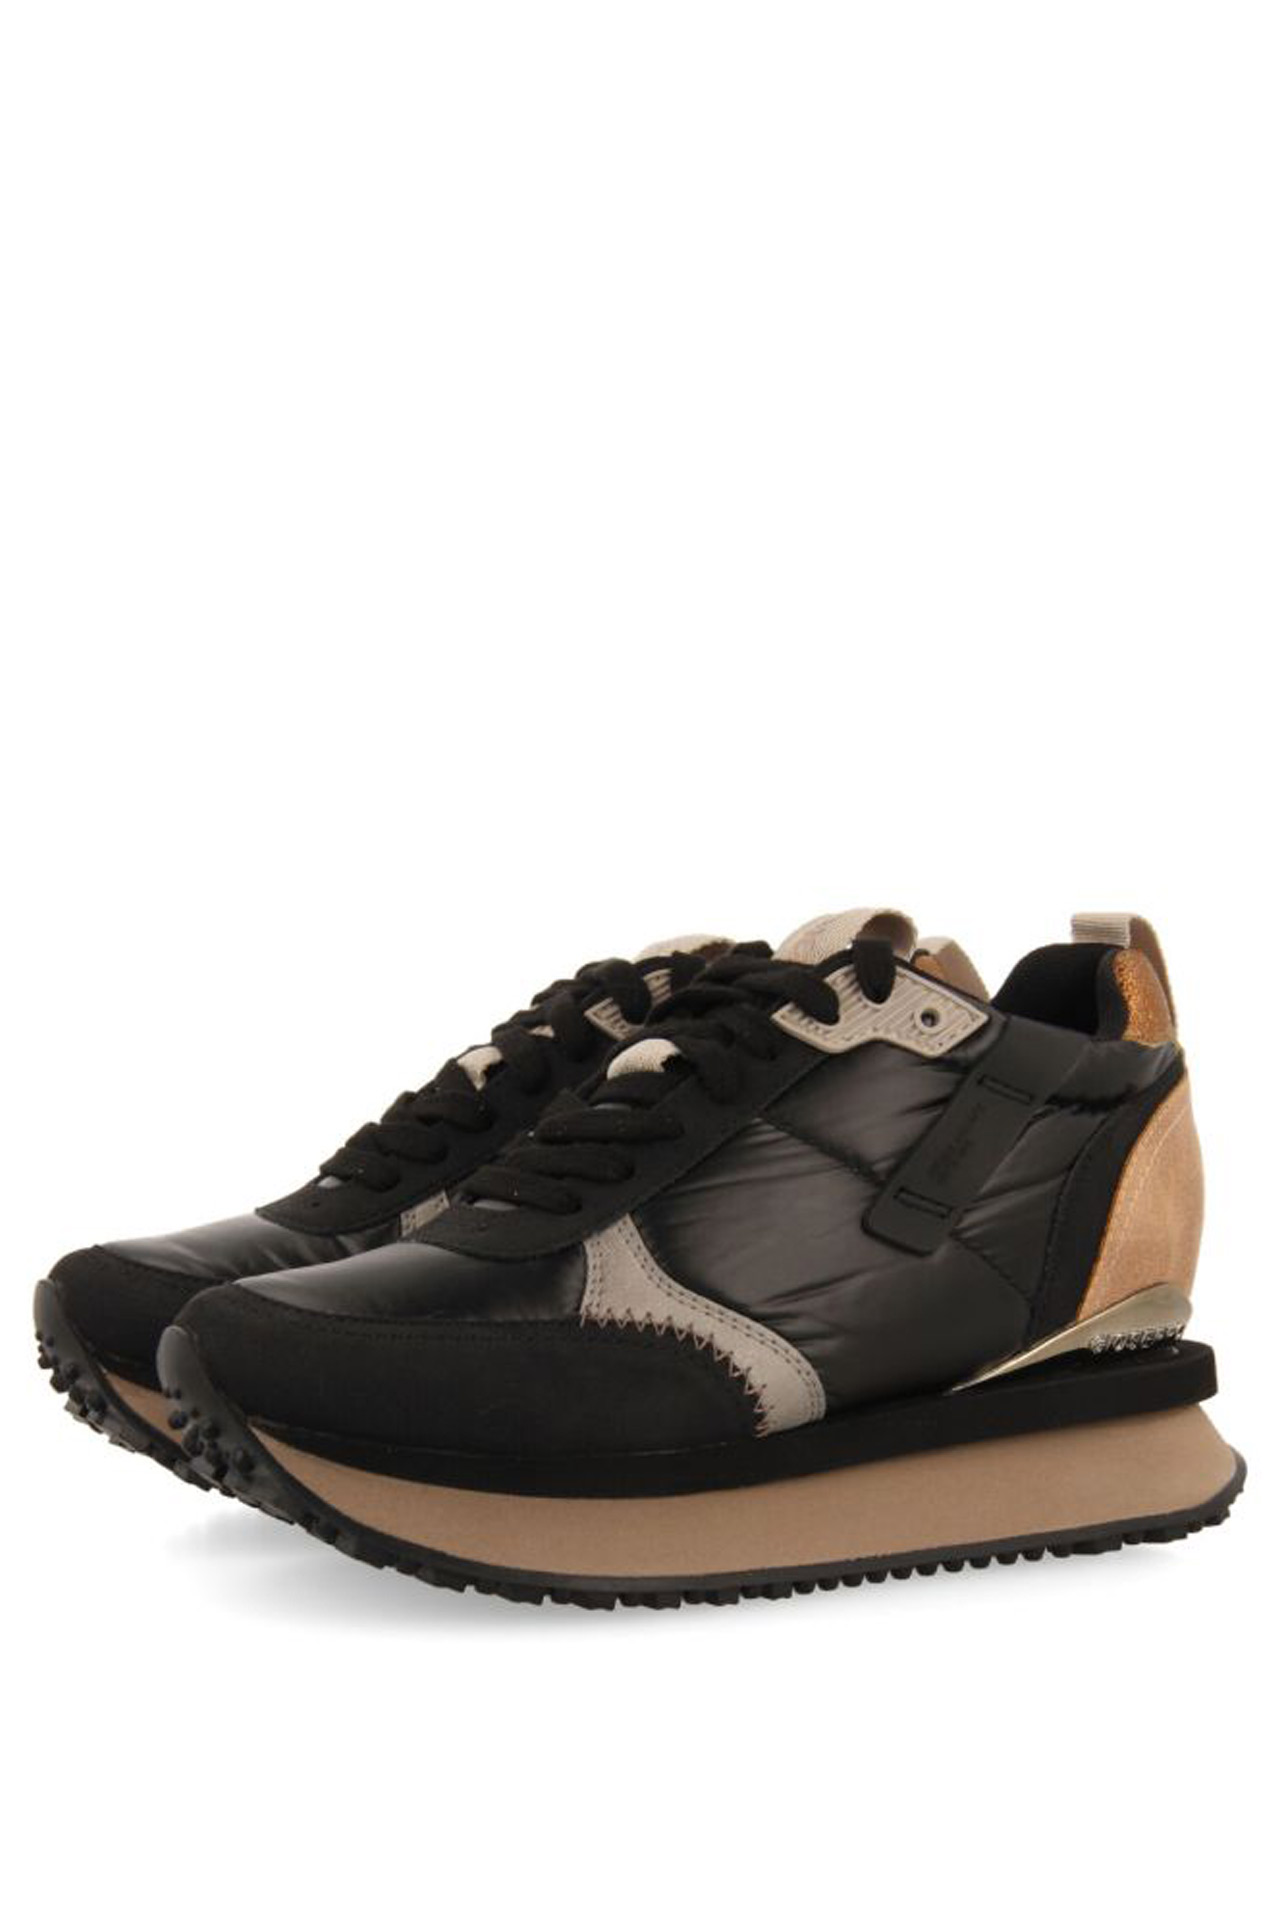 GIOSEPPO ANIF CUSHIONED BLACK SNEAKERS WITH INNER WEDGES